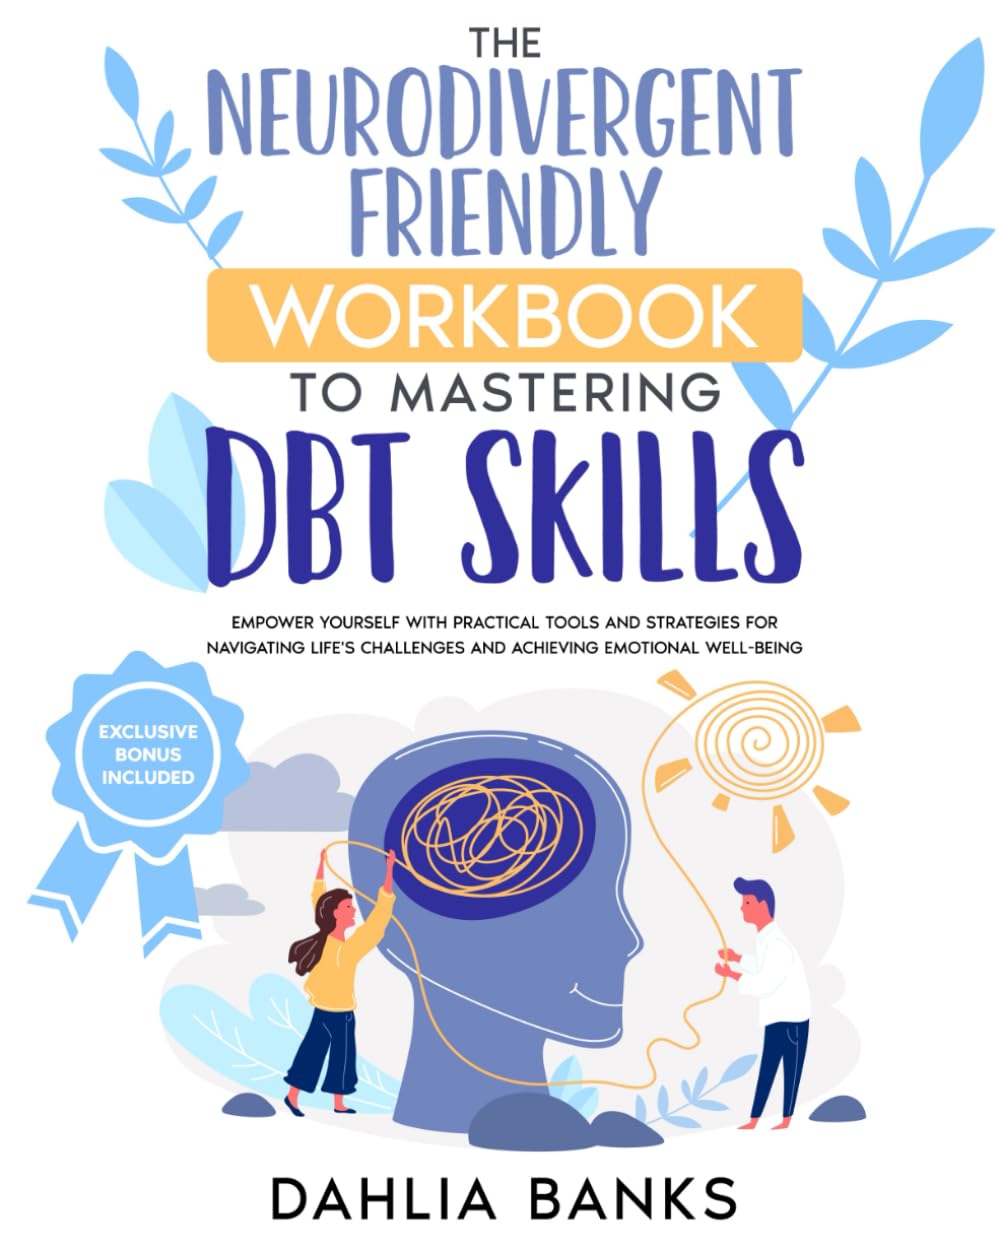 The Neurodivergent Friendly Workbook to Mastering DBT Skills: Empower Yourself with Practical Tools and Strategies for Navigating Life's Challenges and Achieving Emotional Well-Being